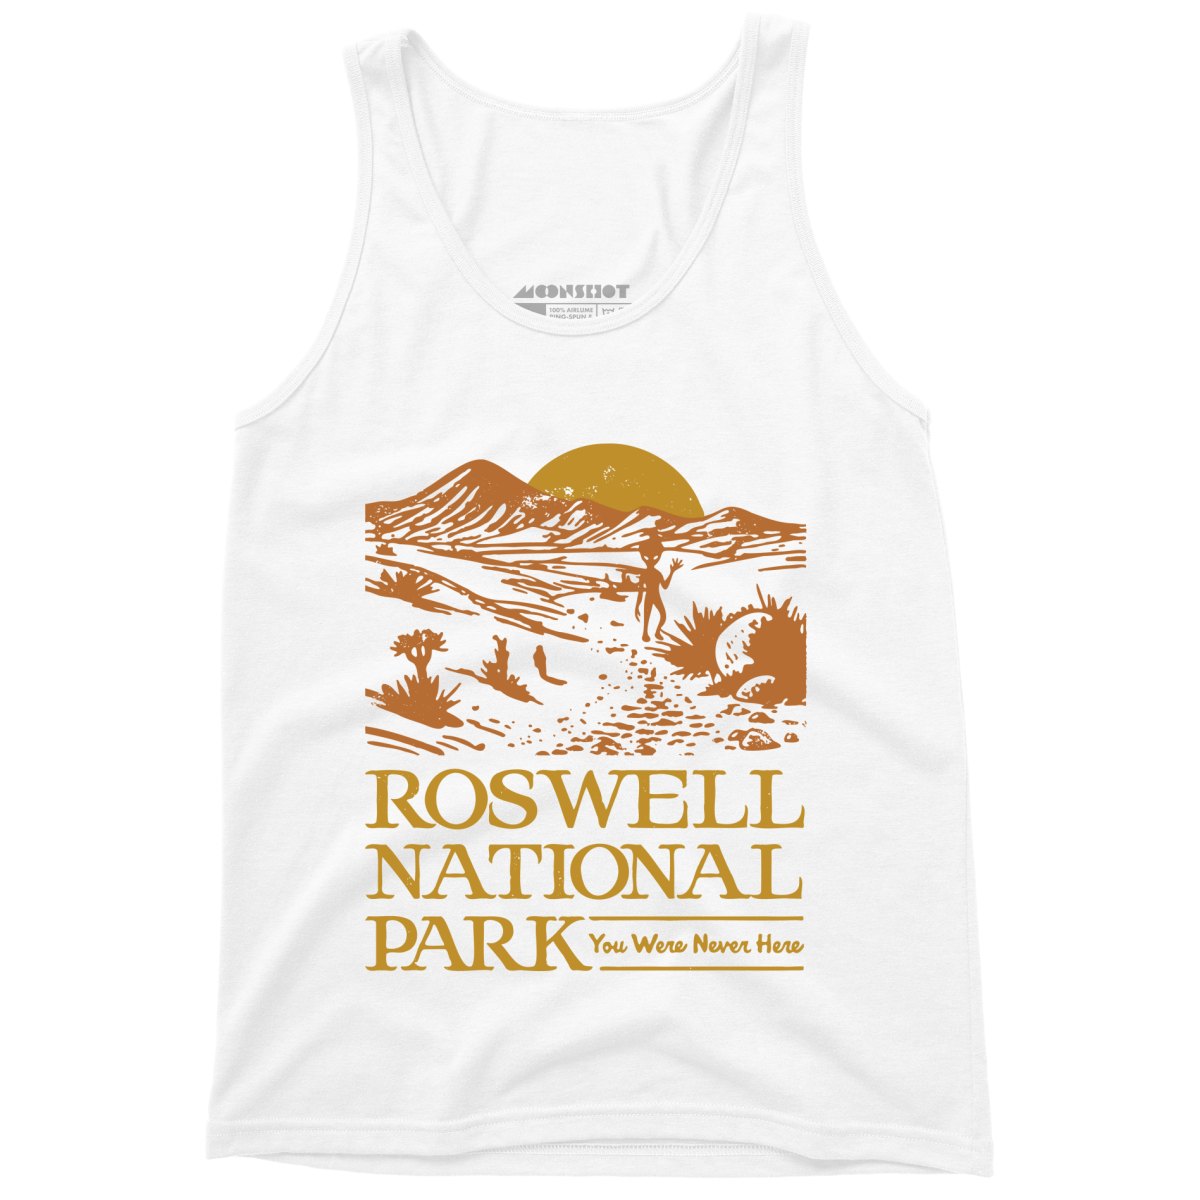 Roswell National Park - Unisex Tank Top